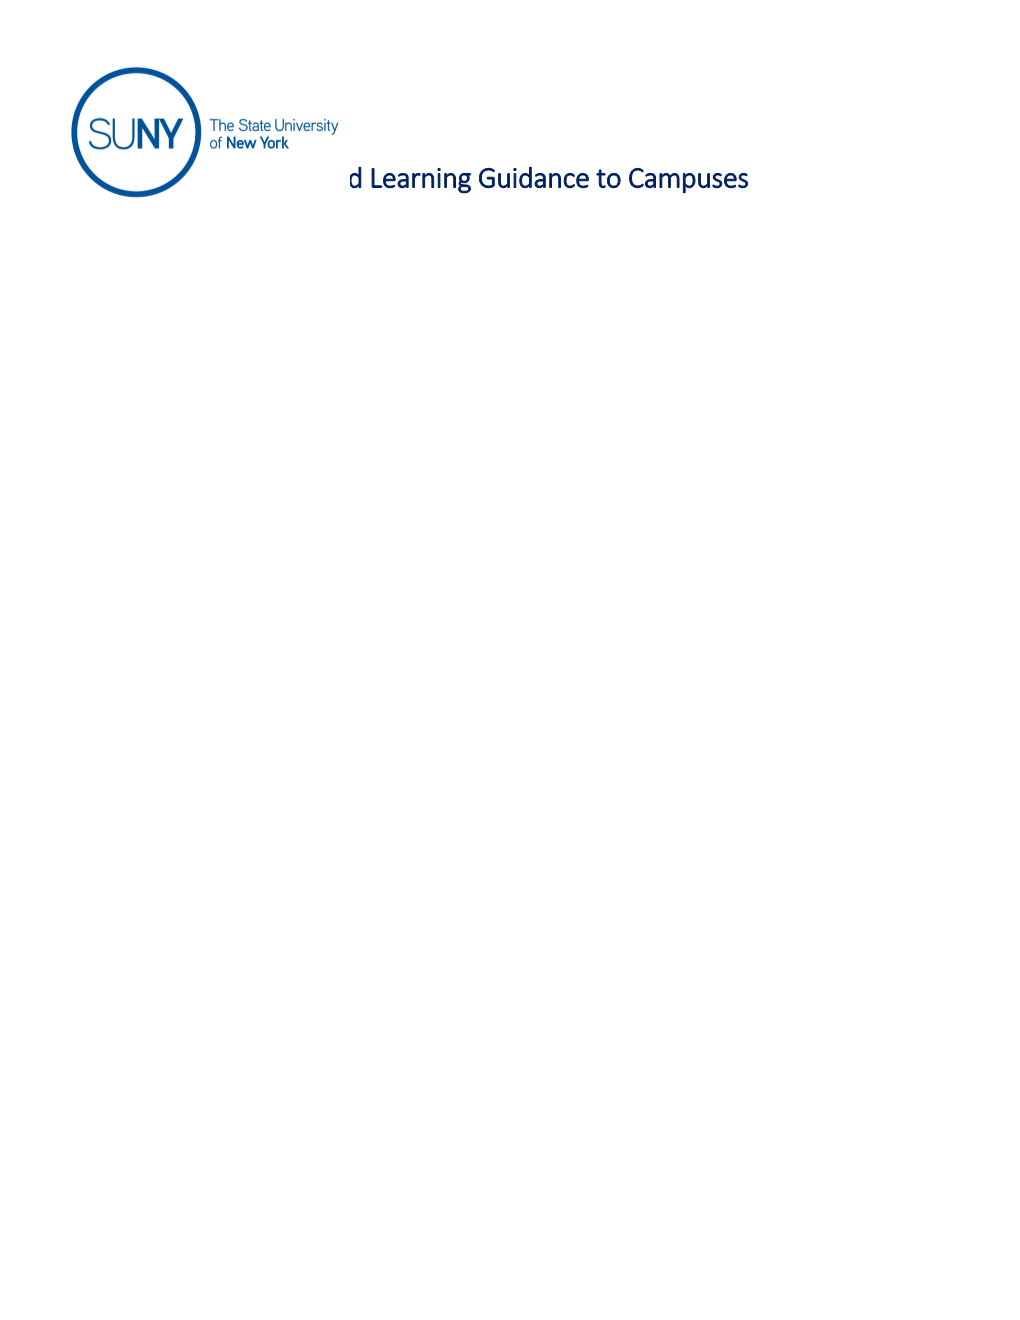 Applied Learning Guidance to Campuses